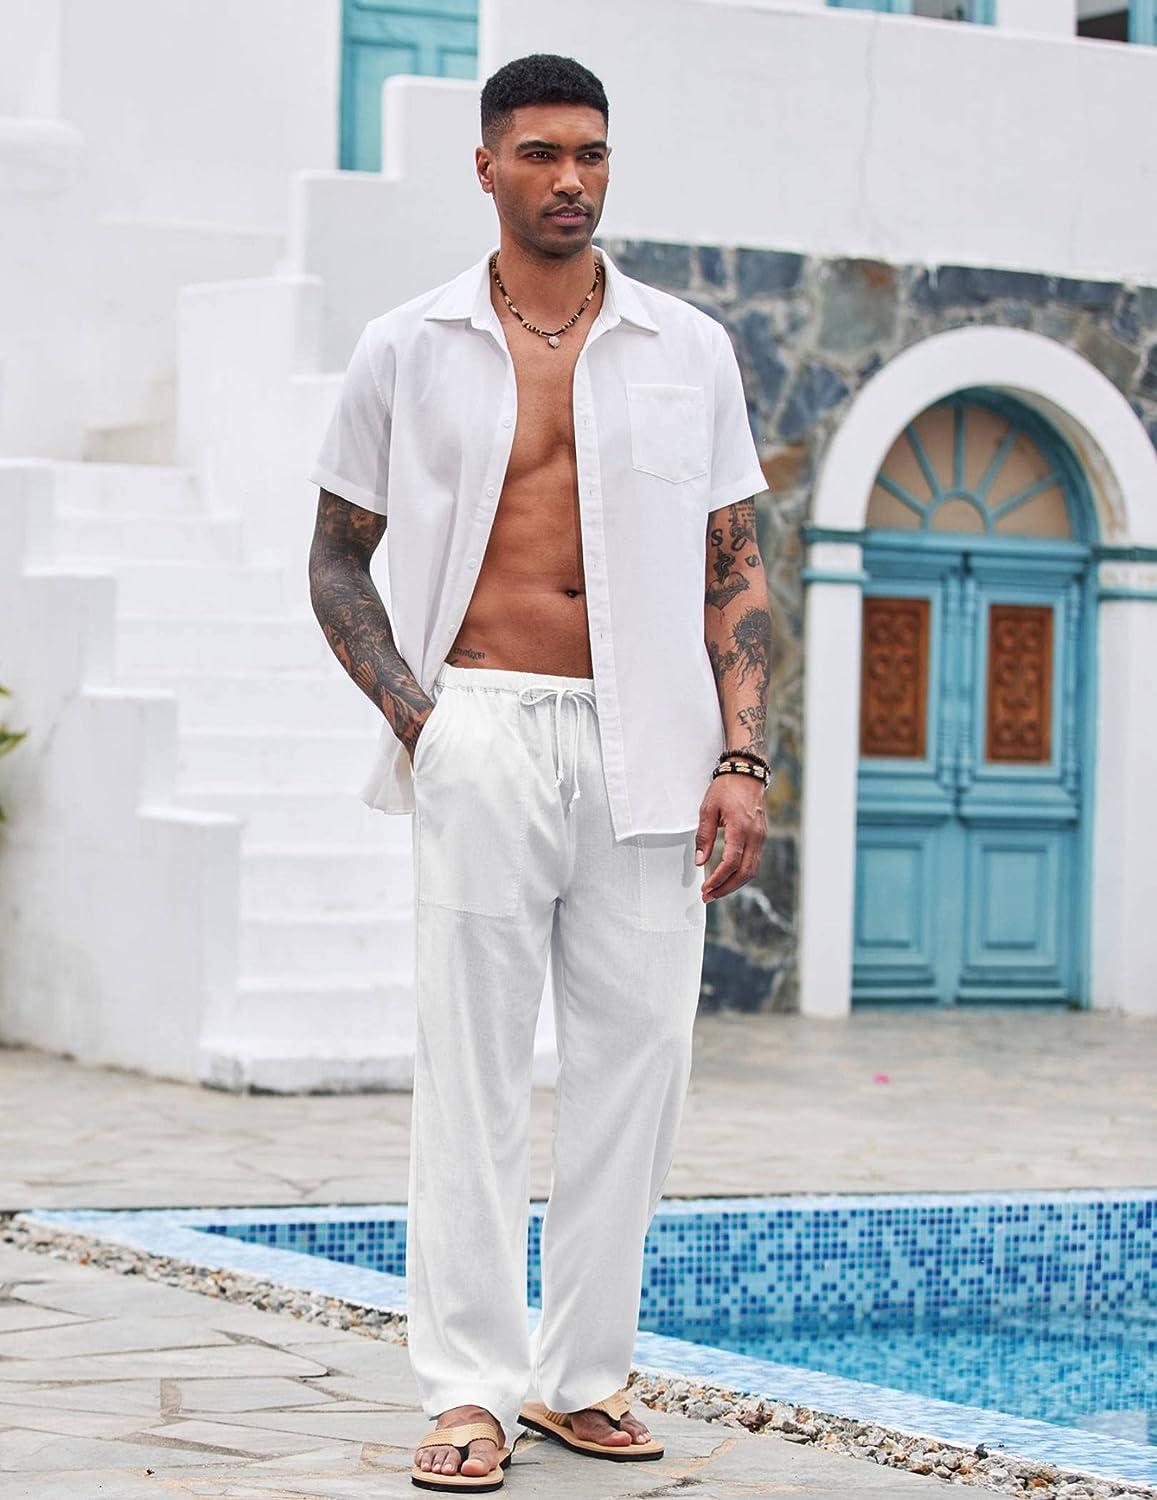 White Pants with Blue Shirt Smart Casual Outfits For Men (292 ideas &  outfits) | Lookastic